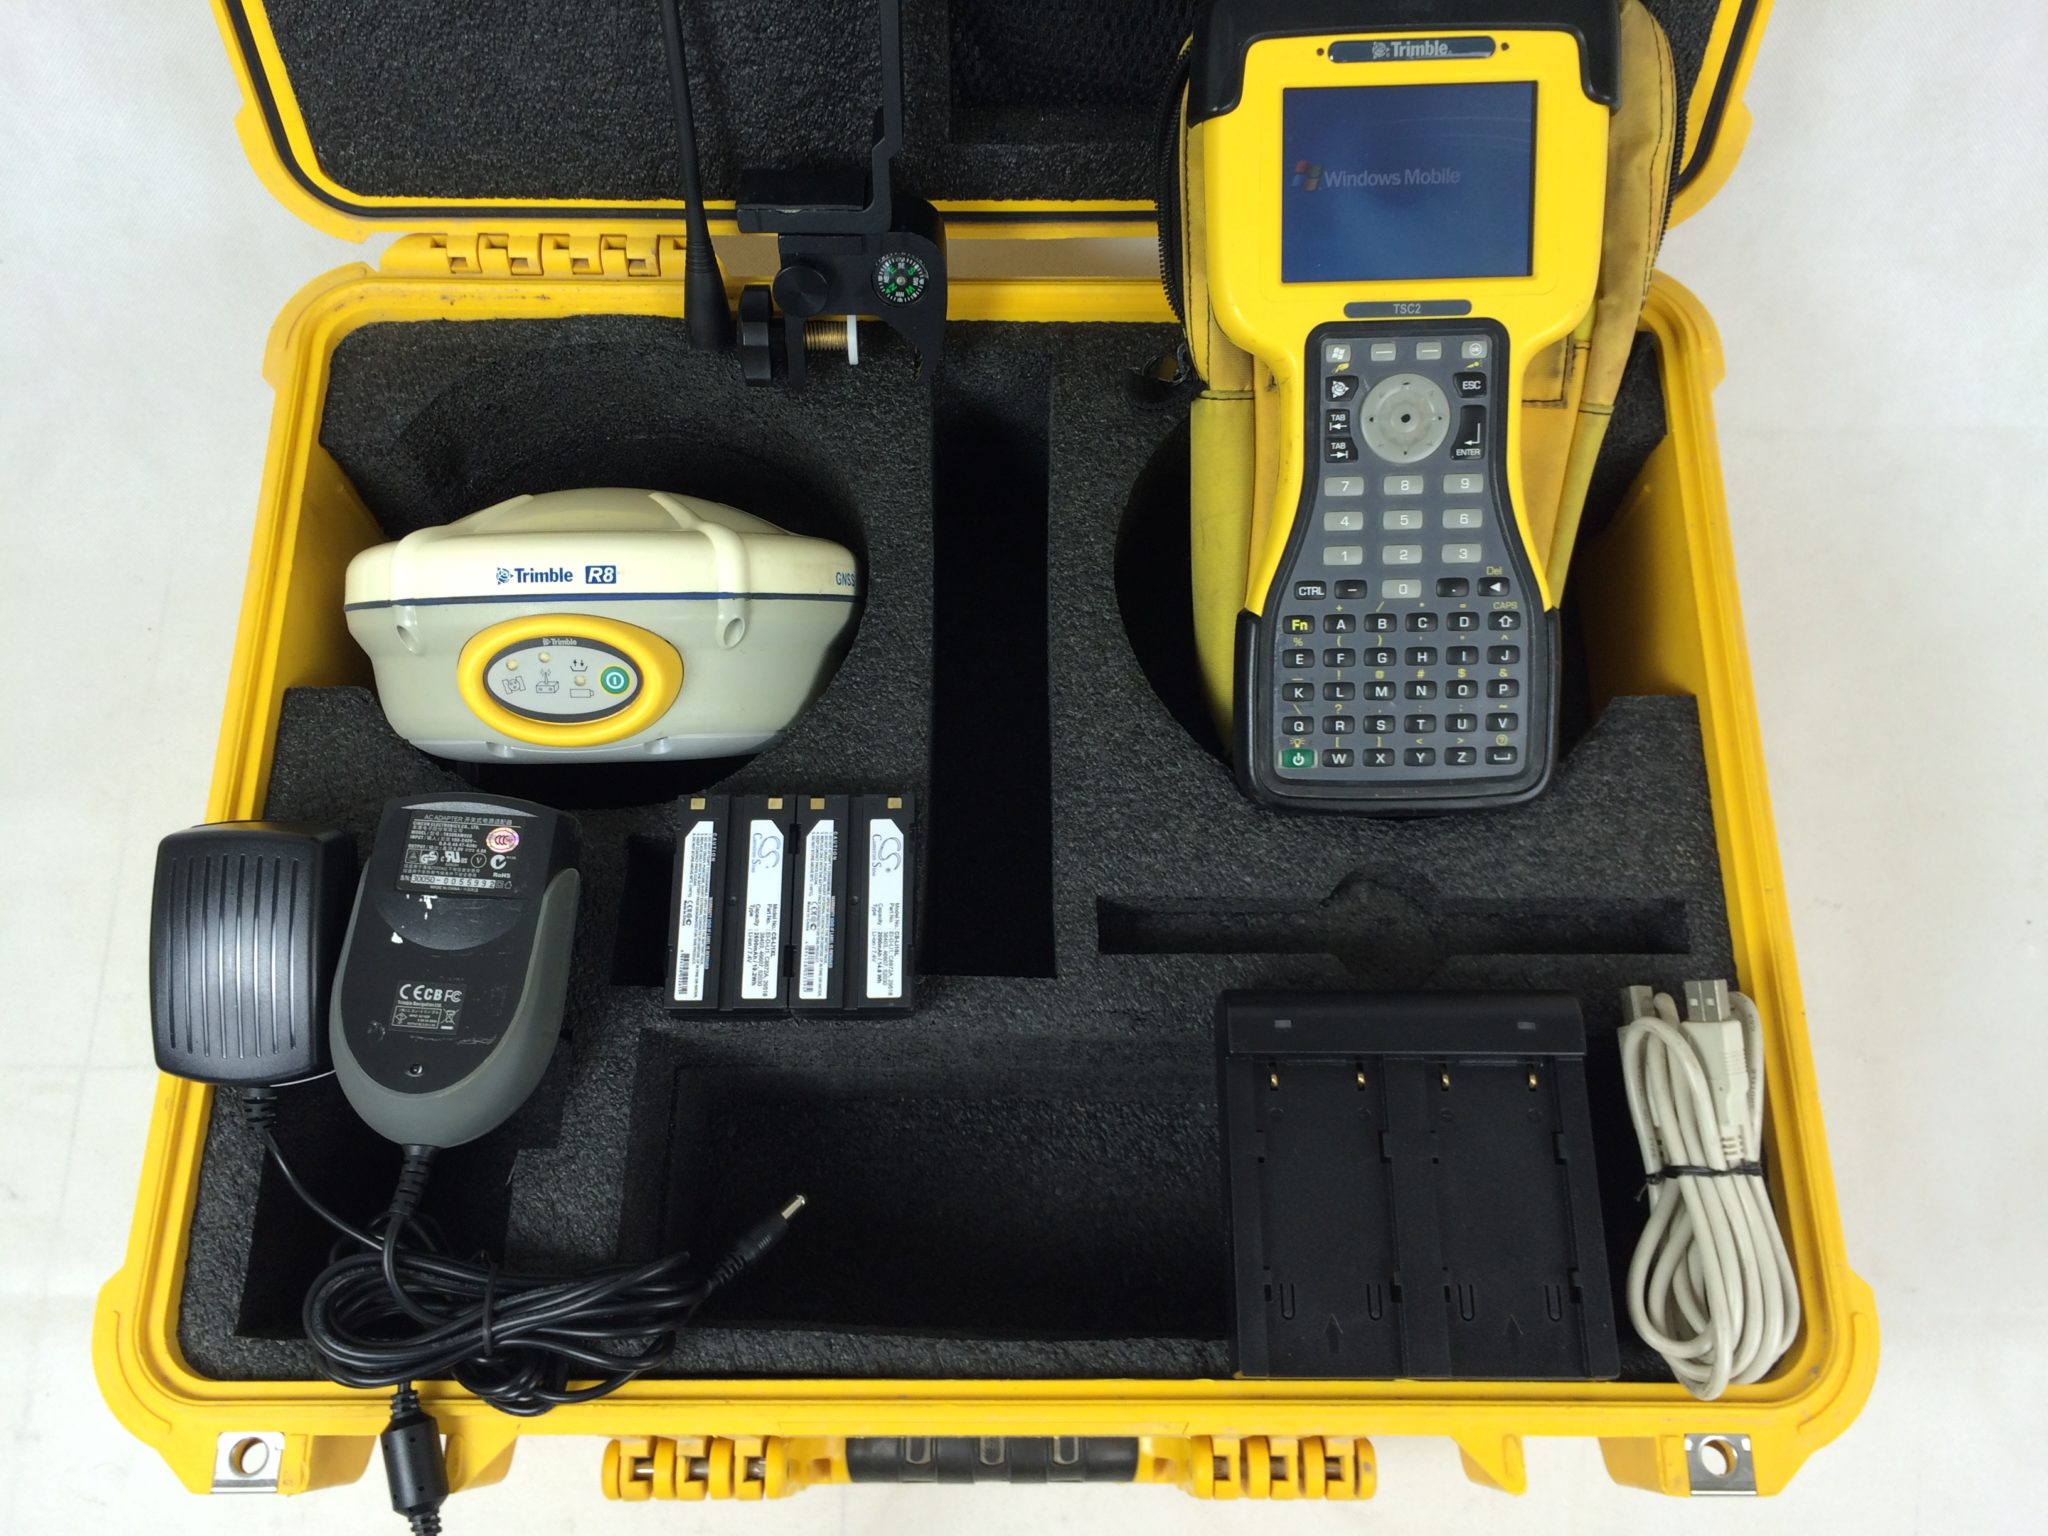 R8 2 GPS/GNSS VRS Network Rover w/ Data Collector | Precision Geosystems, Inc.